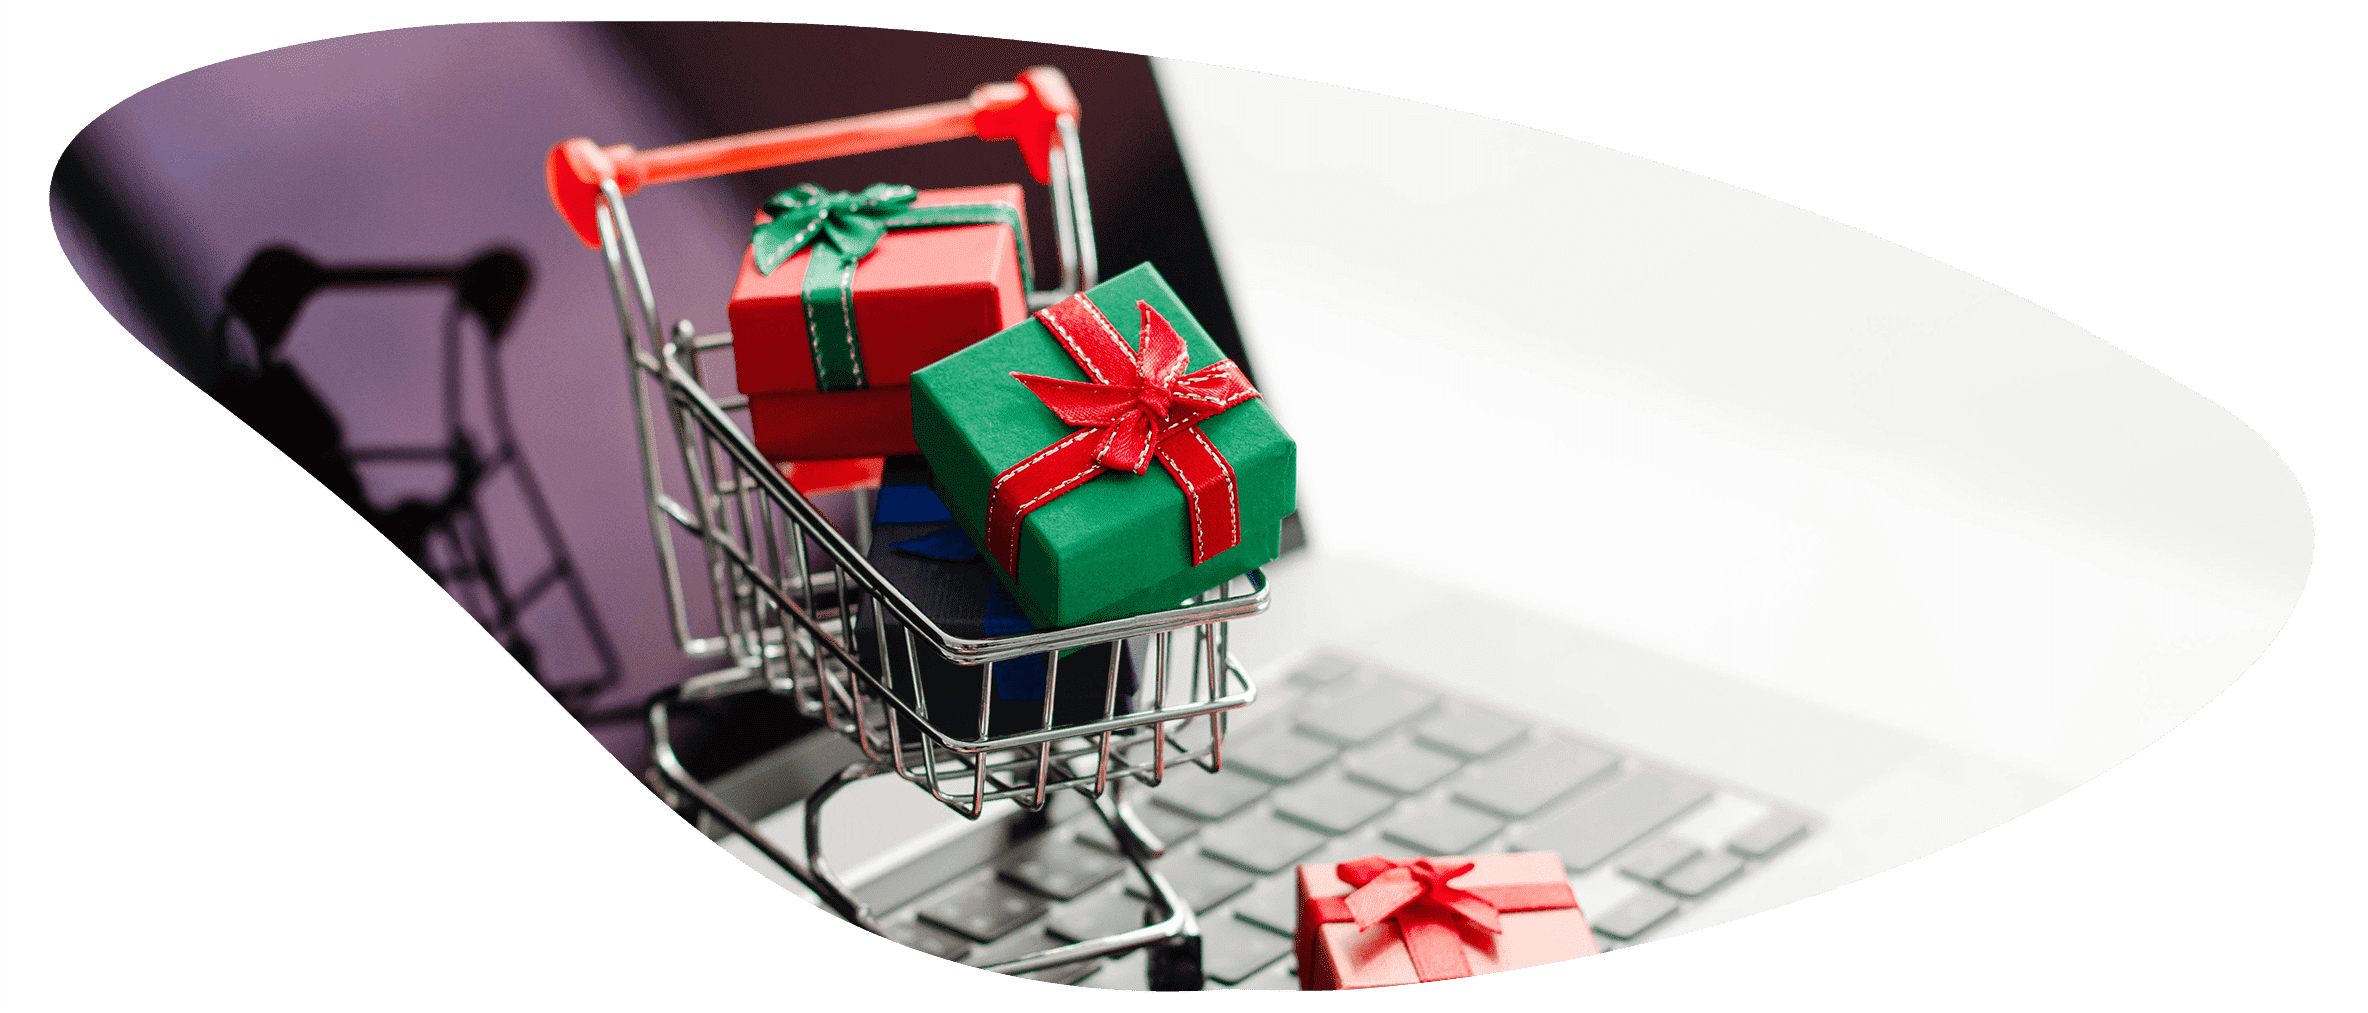 Festive Season Marketing: What You Need to Do to Ace This Holiday Season